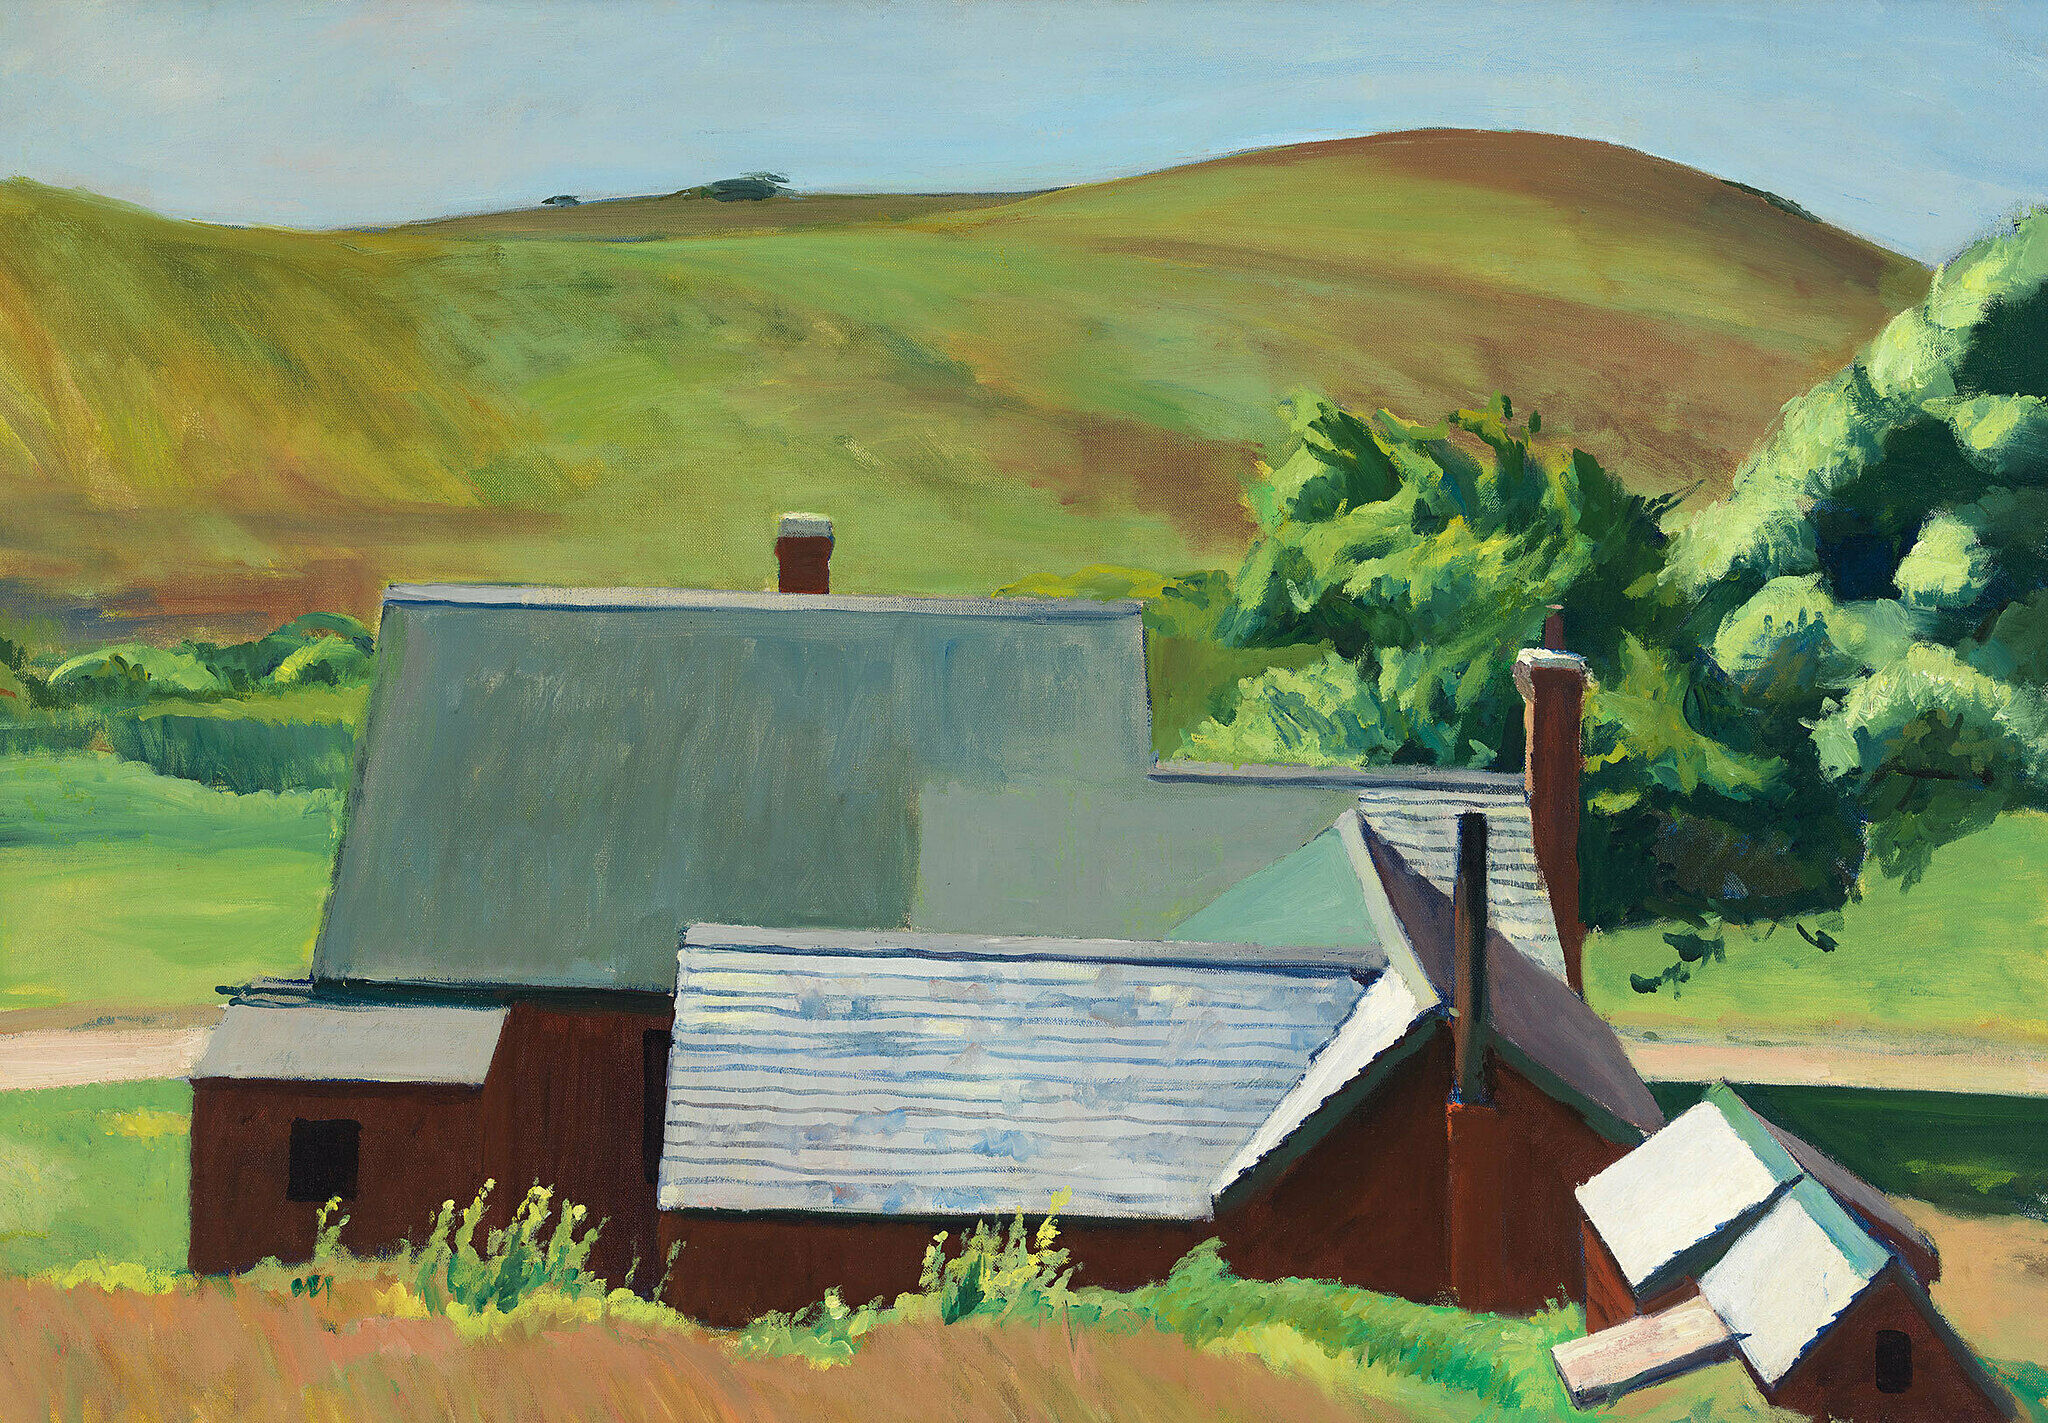 Barn and rolling hills in background.